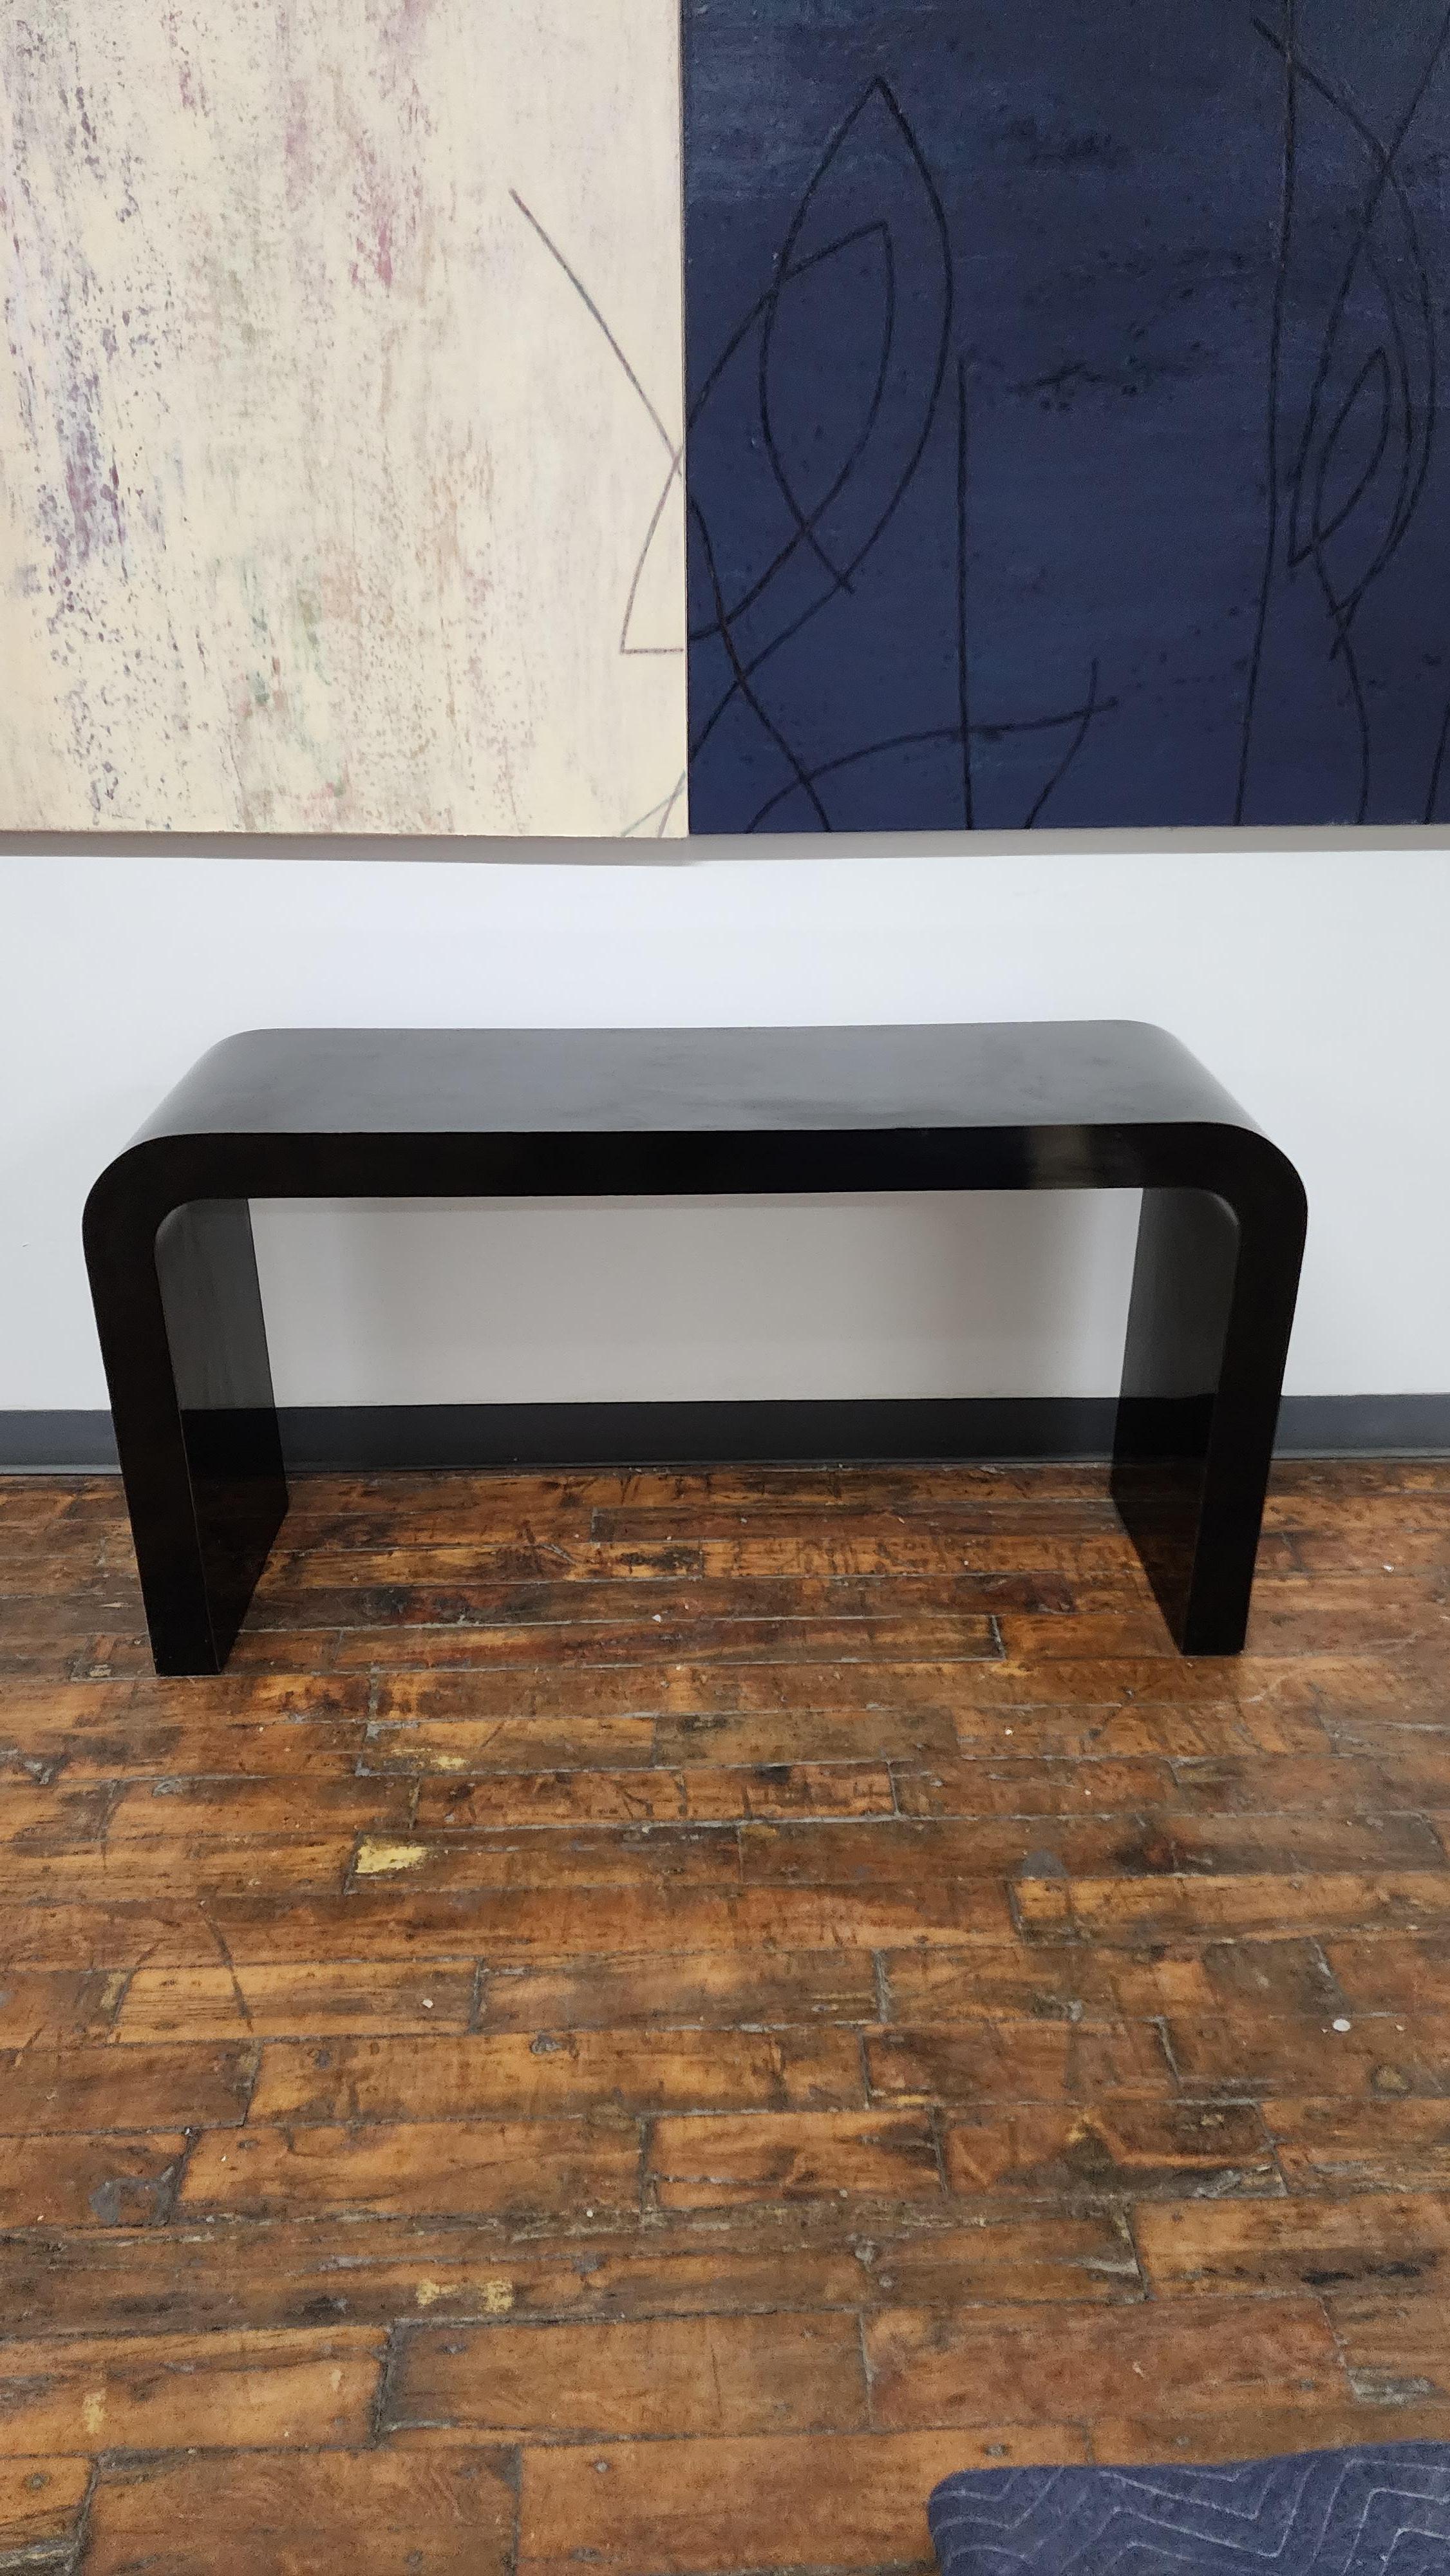 Great post modern gloss black waterfall console table.  The black post modern table would go great with many styles.